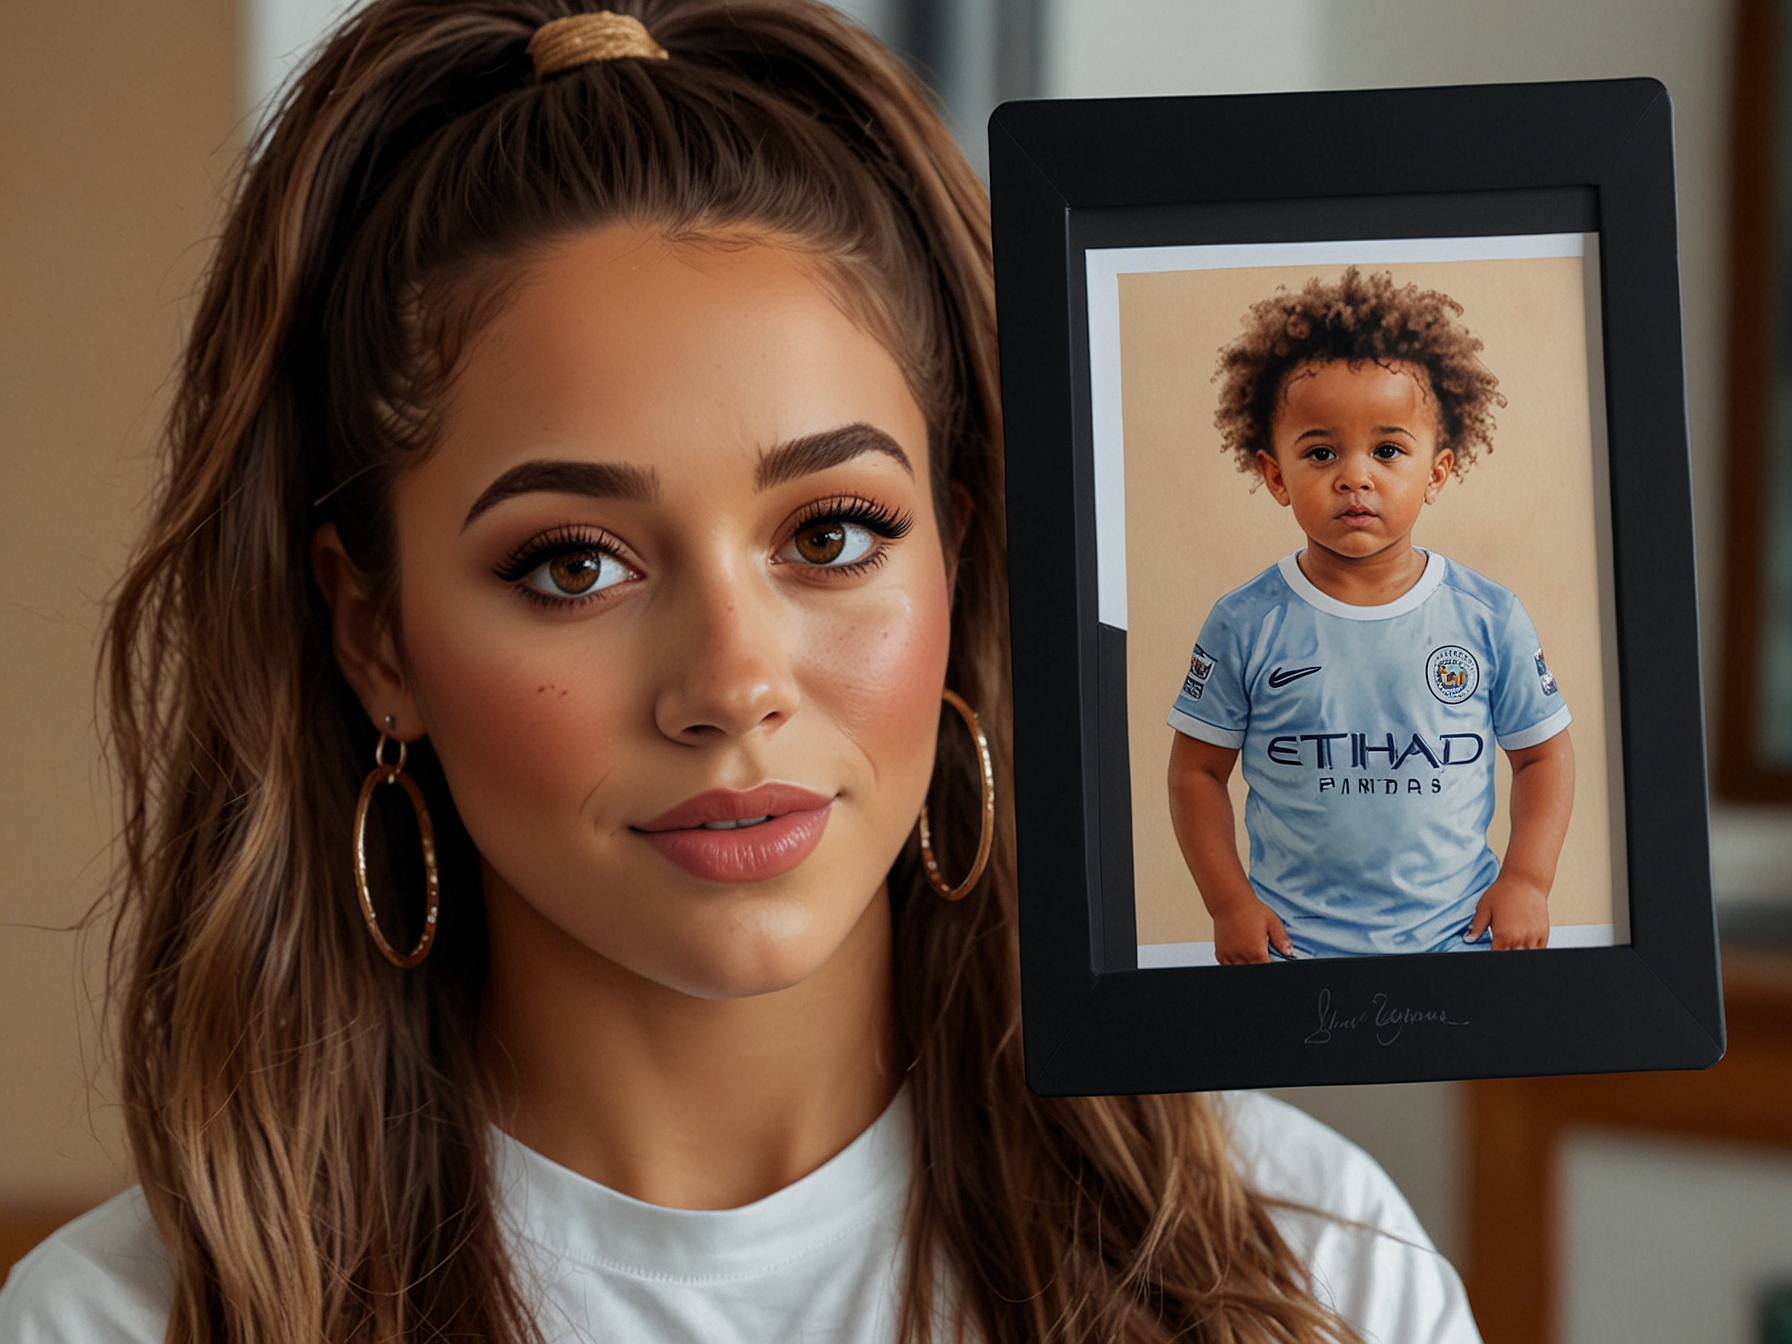 Lauryn Goodman shares a heartfelt screenshot from a supporter, praising her strength and dedication as a mother to her and Kyle Walker's son, Kairo, amid ongoing public scrutiny.